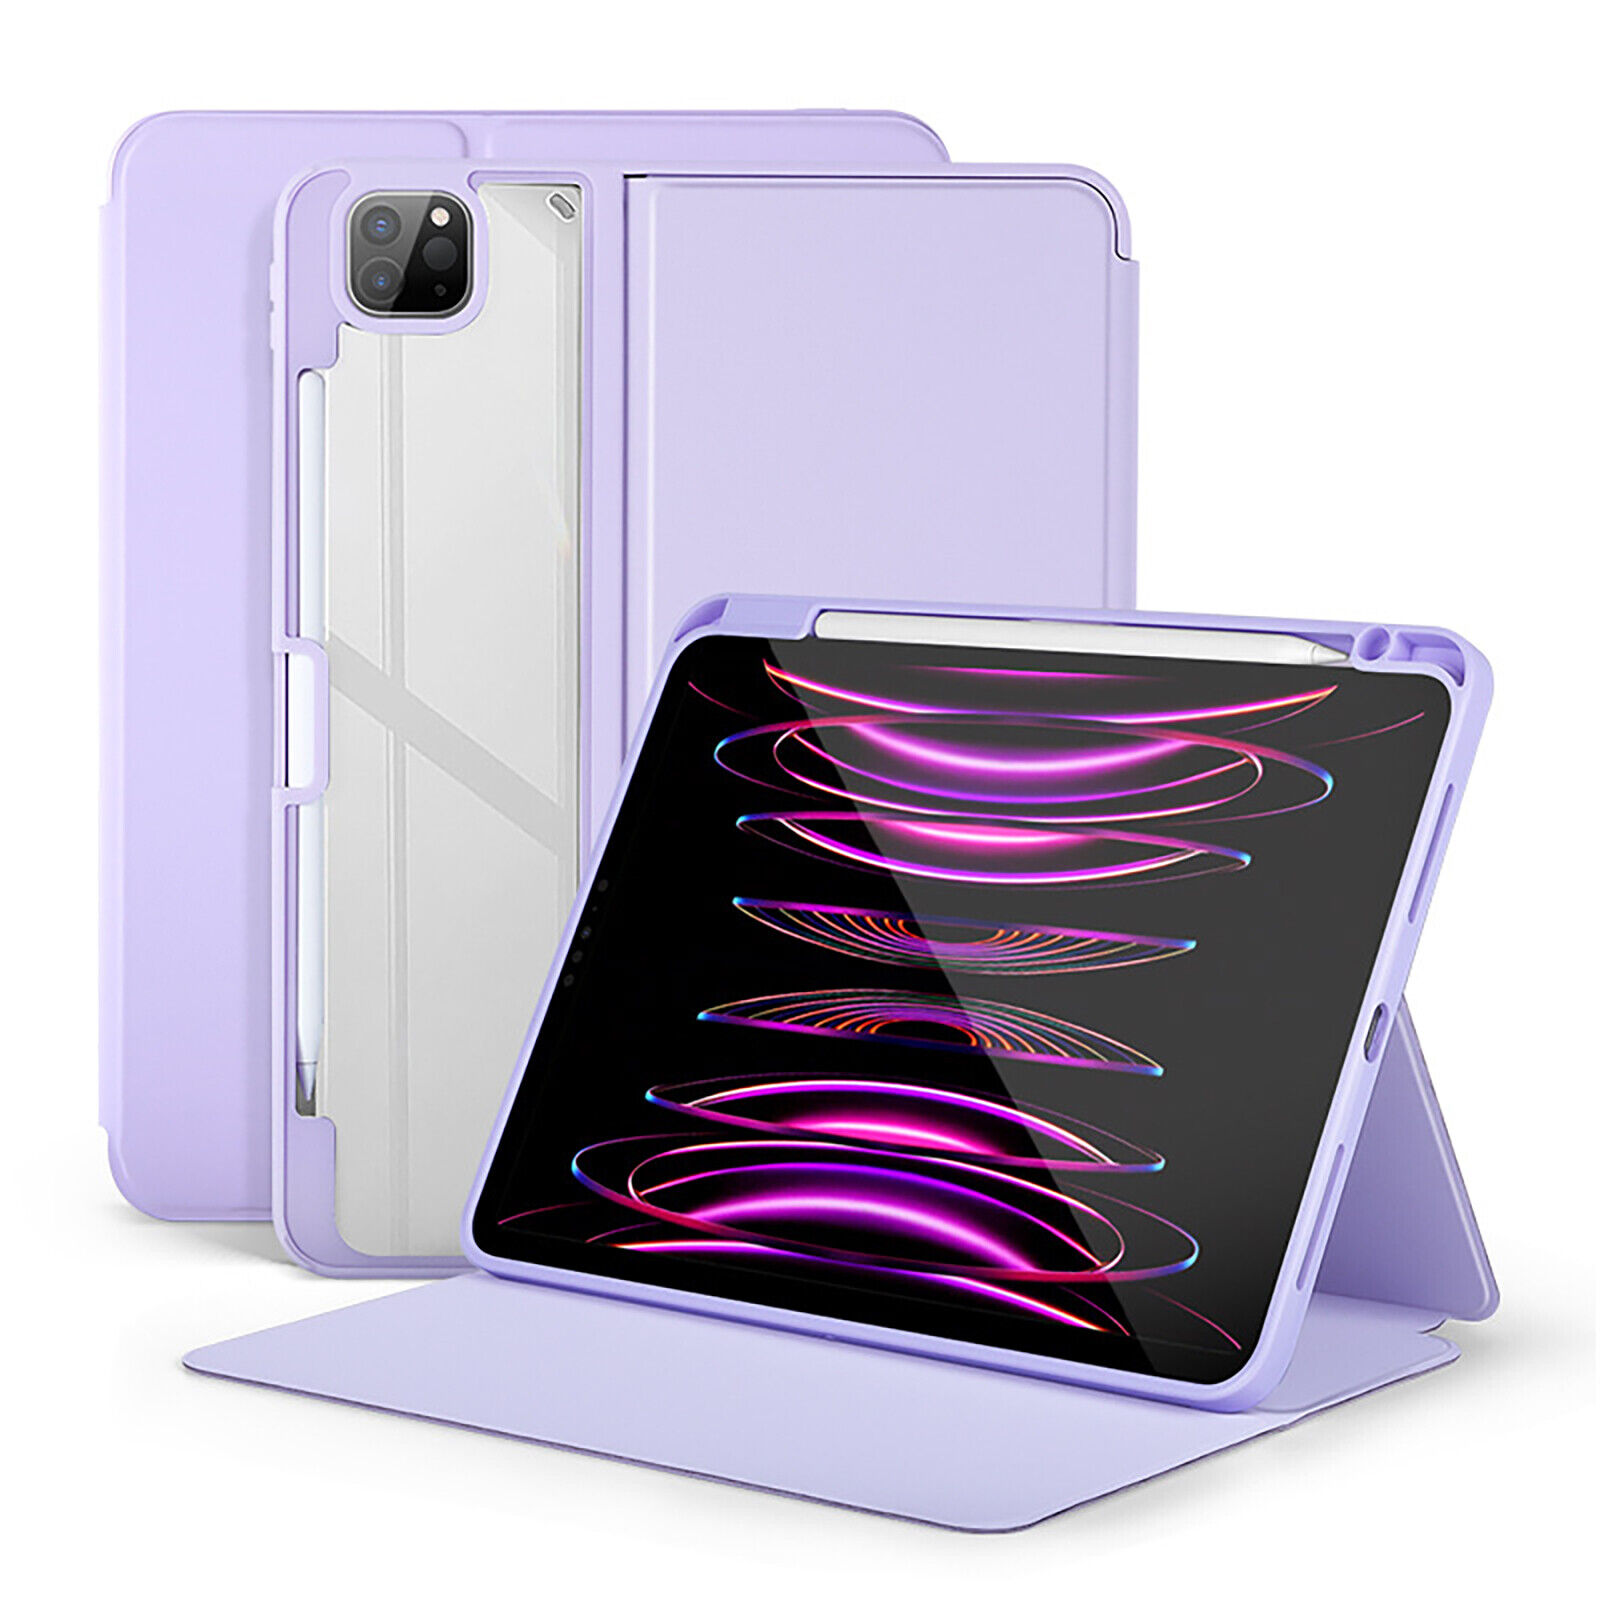 Acrylic Transparent Hard PC Tablet Protective Case Cover for iPad Pro 12.9 inch